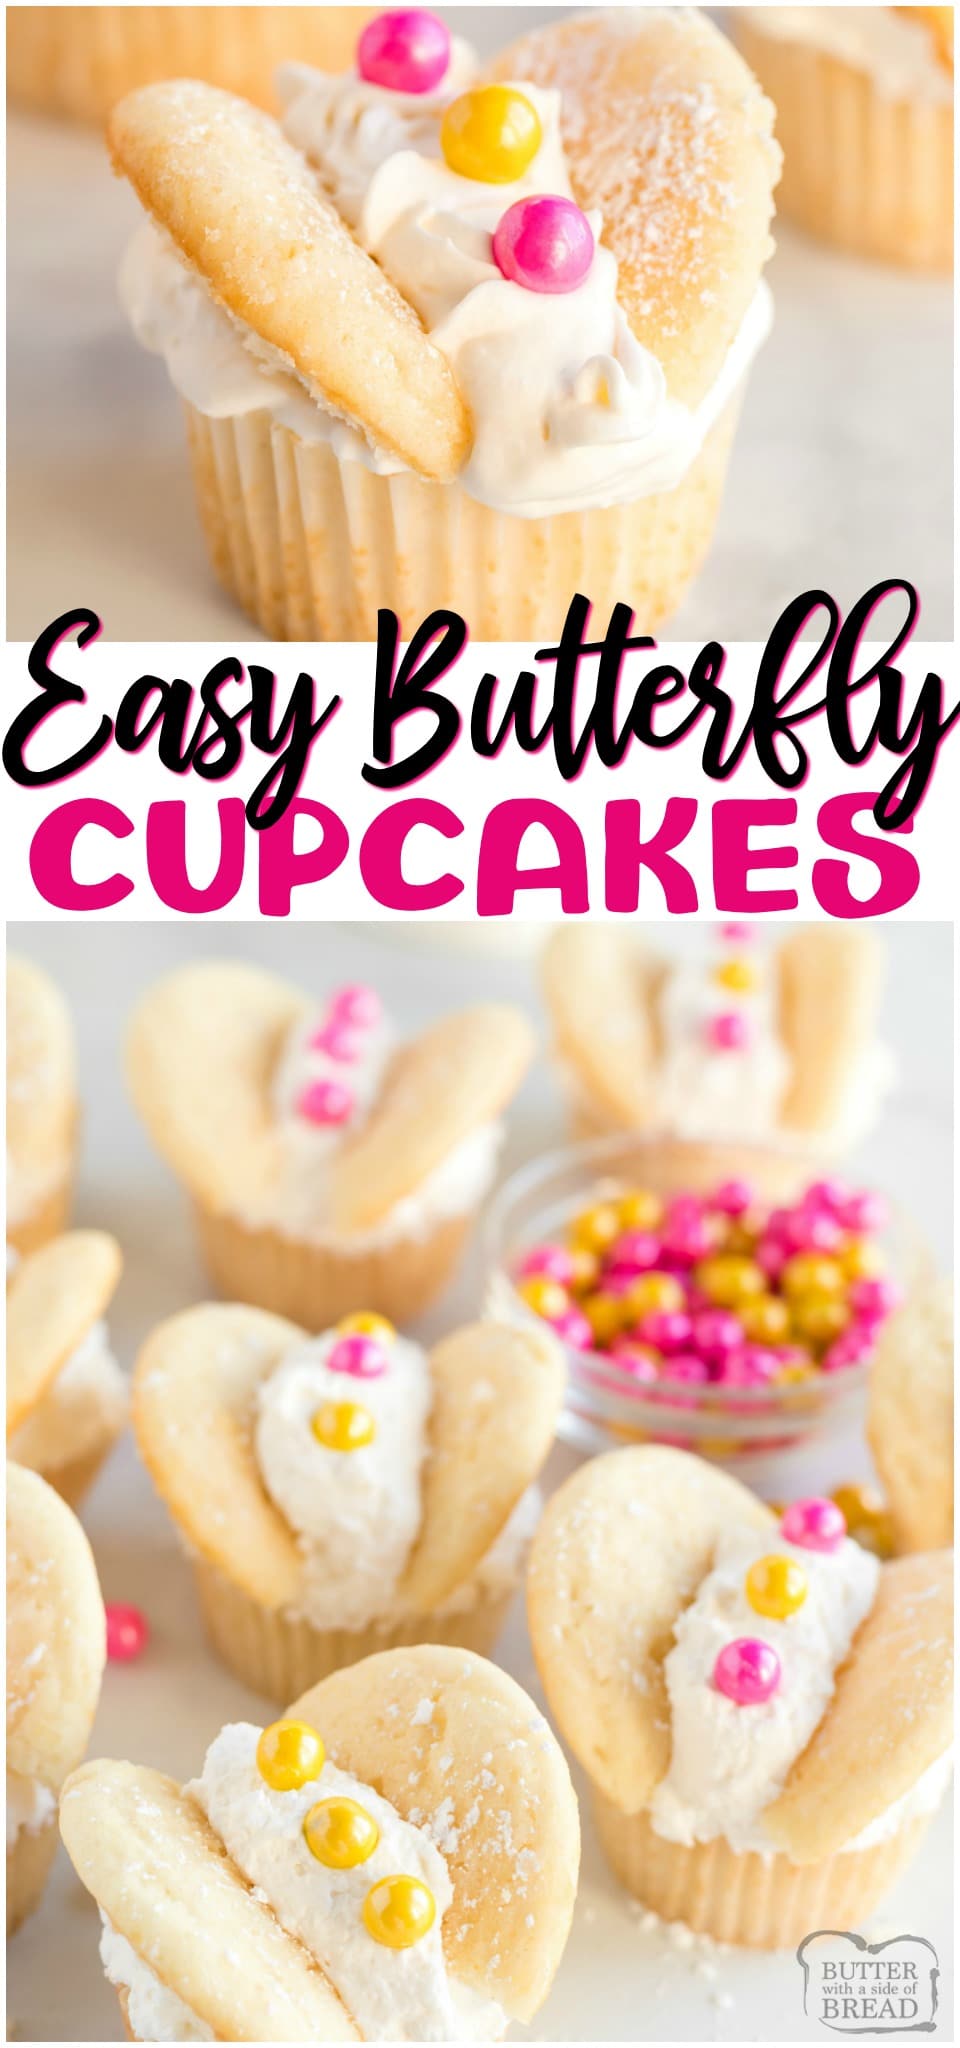 Vanilla Butterfly Cupcakes topped with whipped cream and colorful candies. Easily make these perfect spring butterfly cupcakes for any occasion! #cupcakes #dessert #baking #vanilla #butterfly #Spring #Pretty #recipe from BUTTER WITH A SIDE OF BREAD